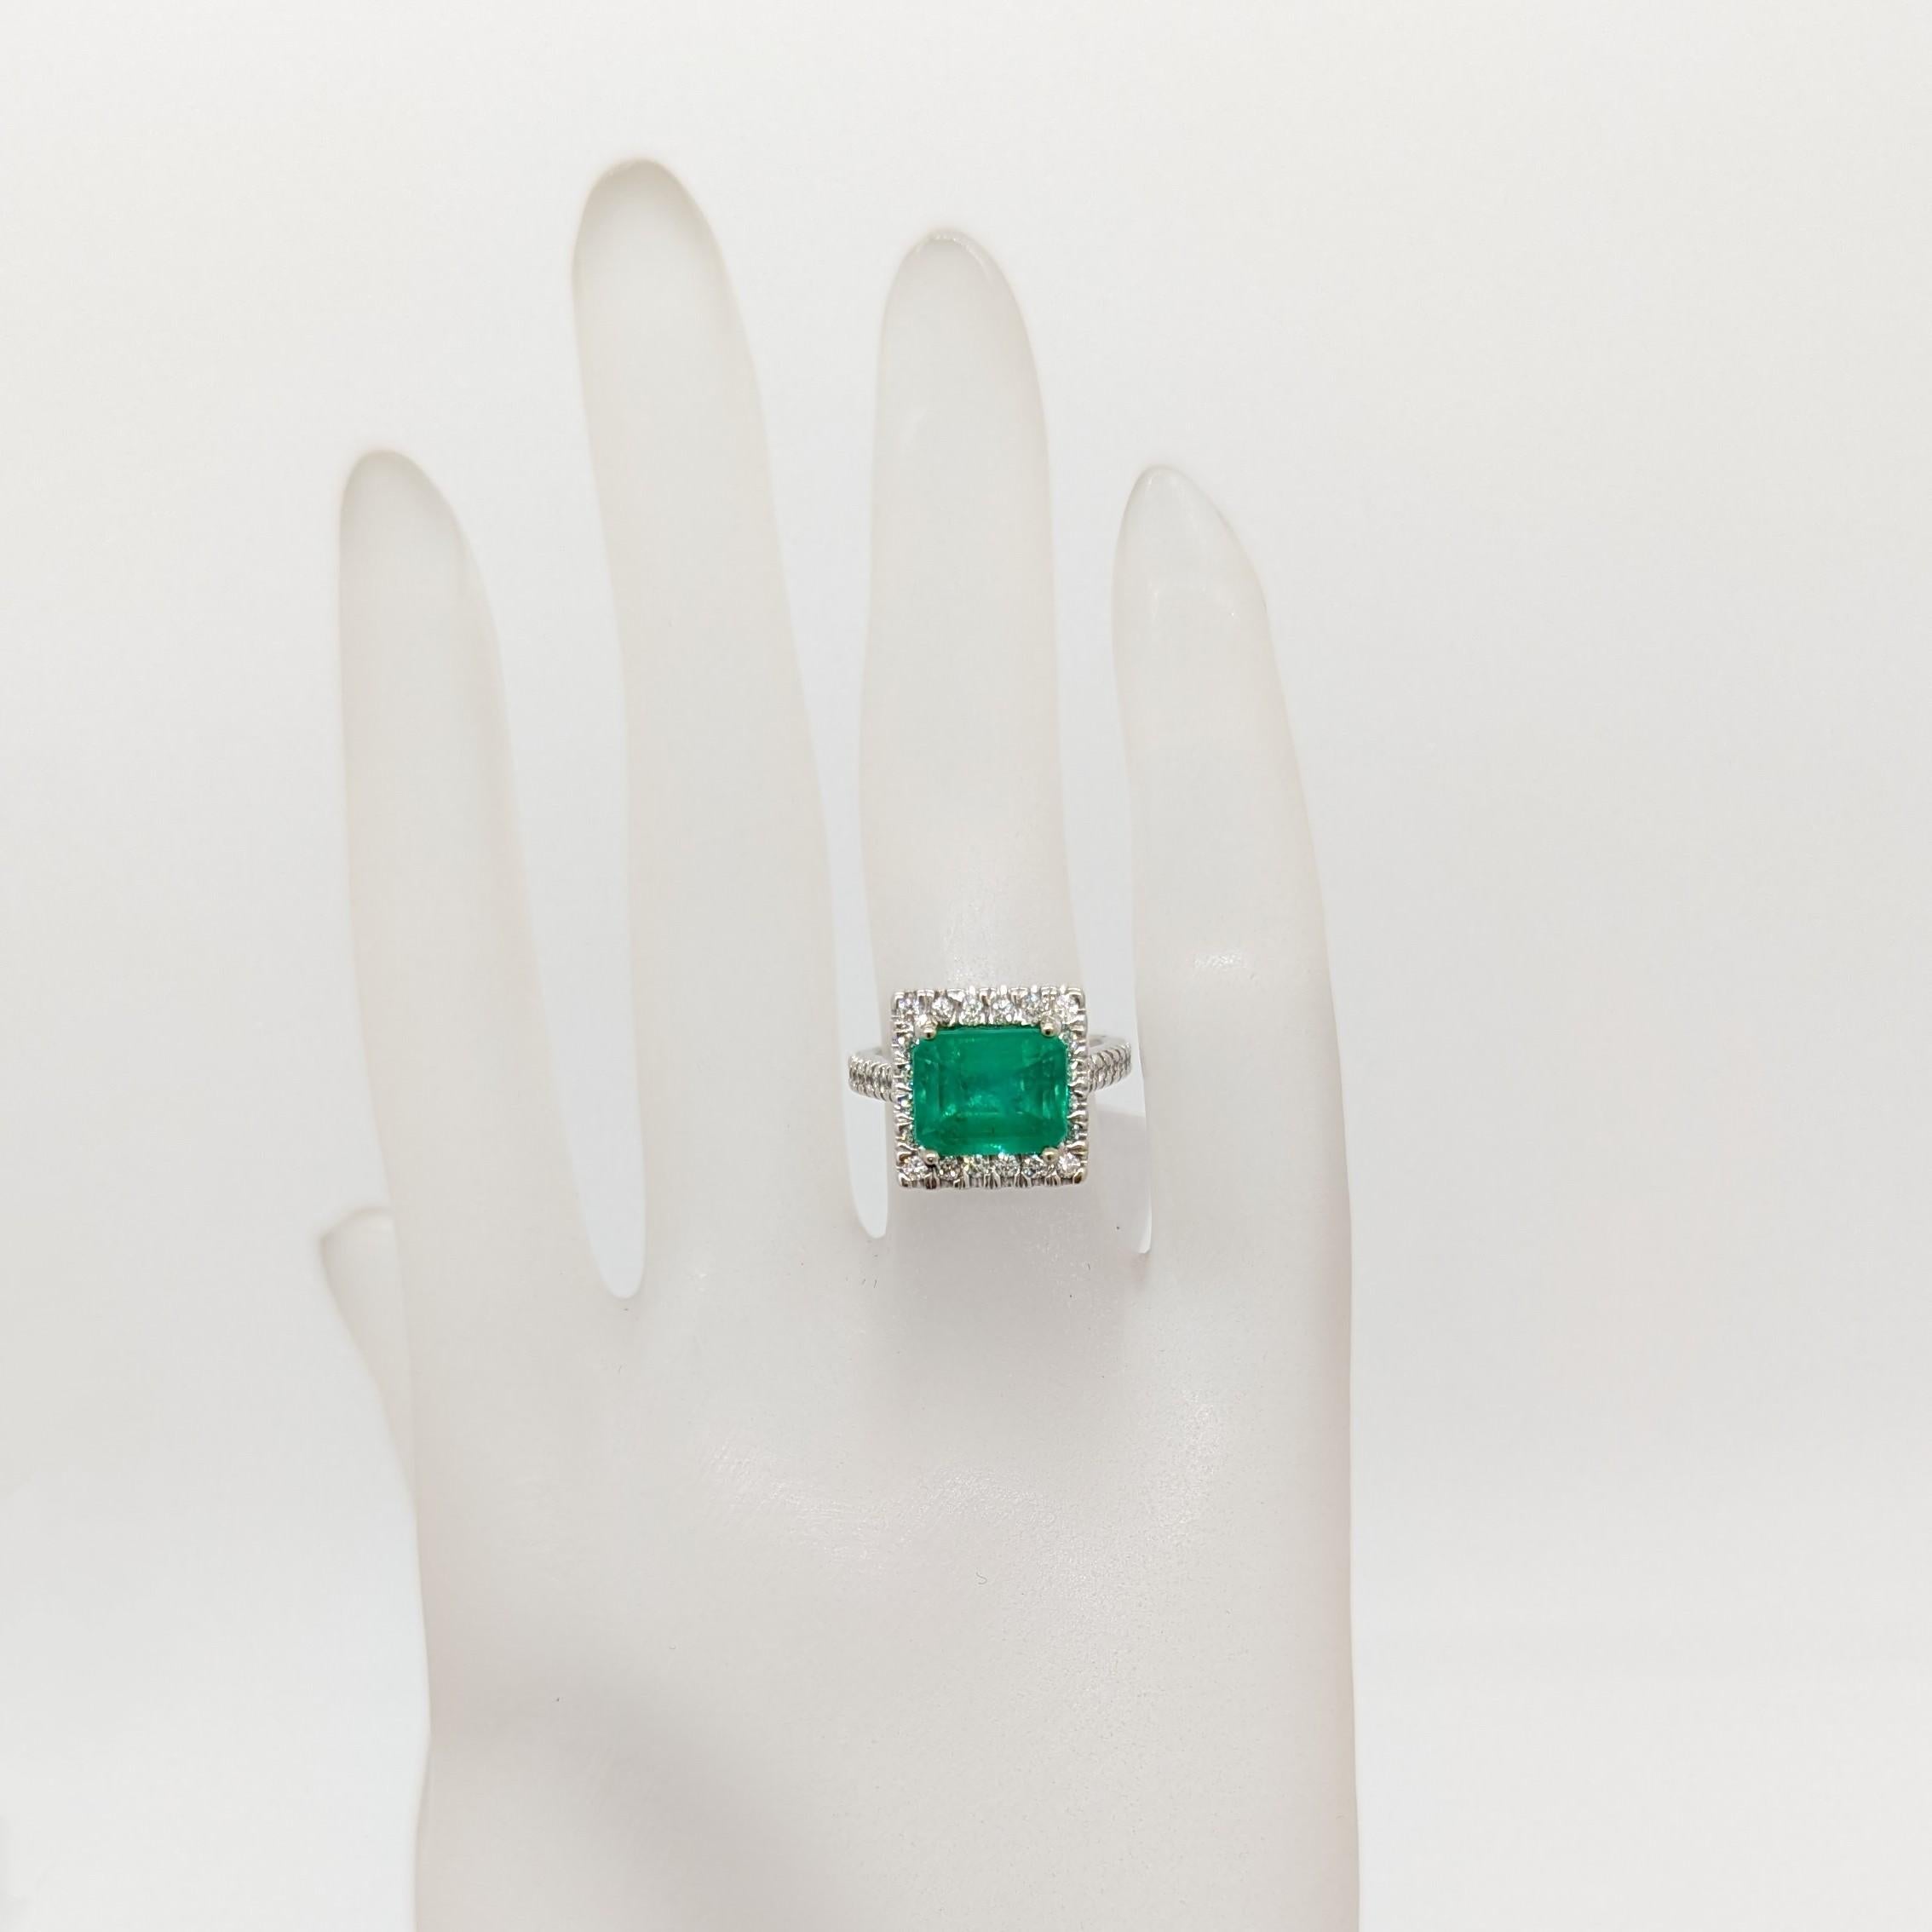 Beautiful 2.54 ct. emerald octagon with 0.45 ct. good quality white diamond round pave.  Handmade in 14k white gold.  Ring size 3.75.